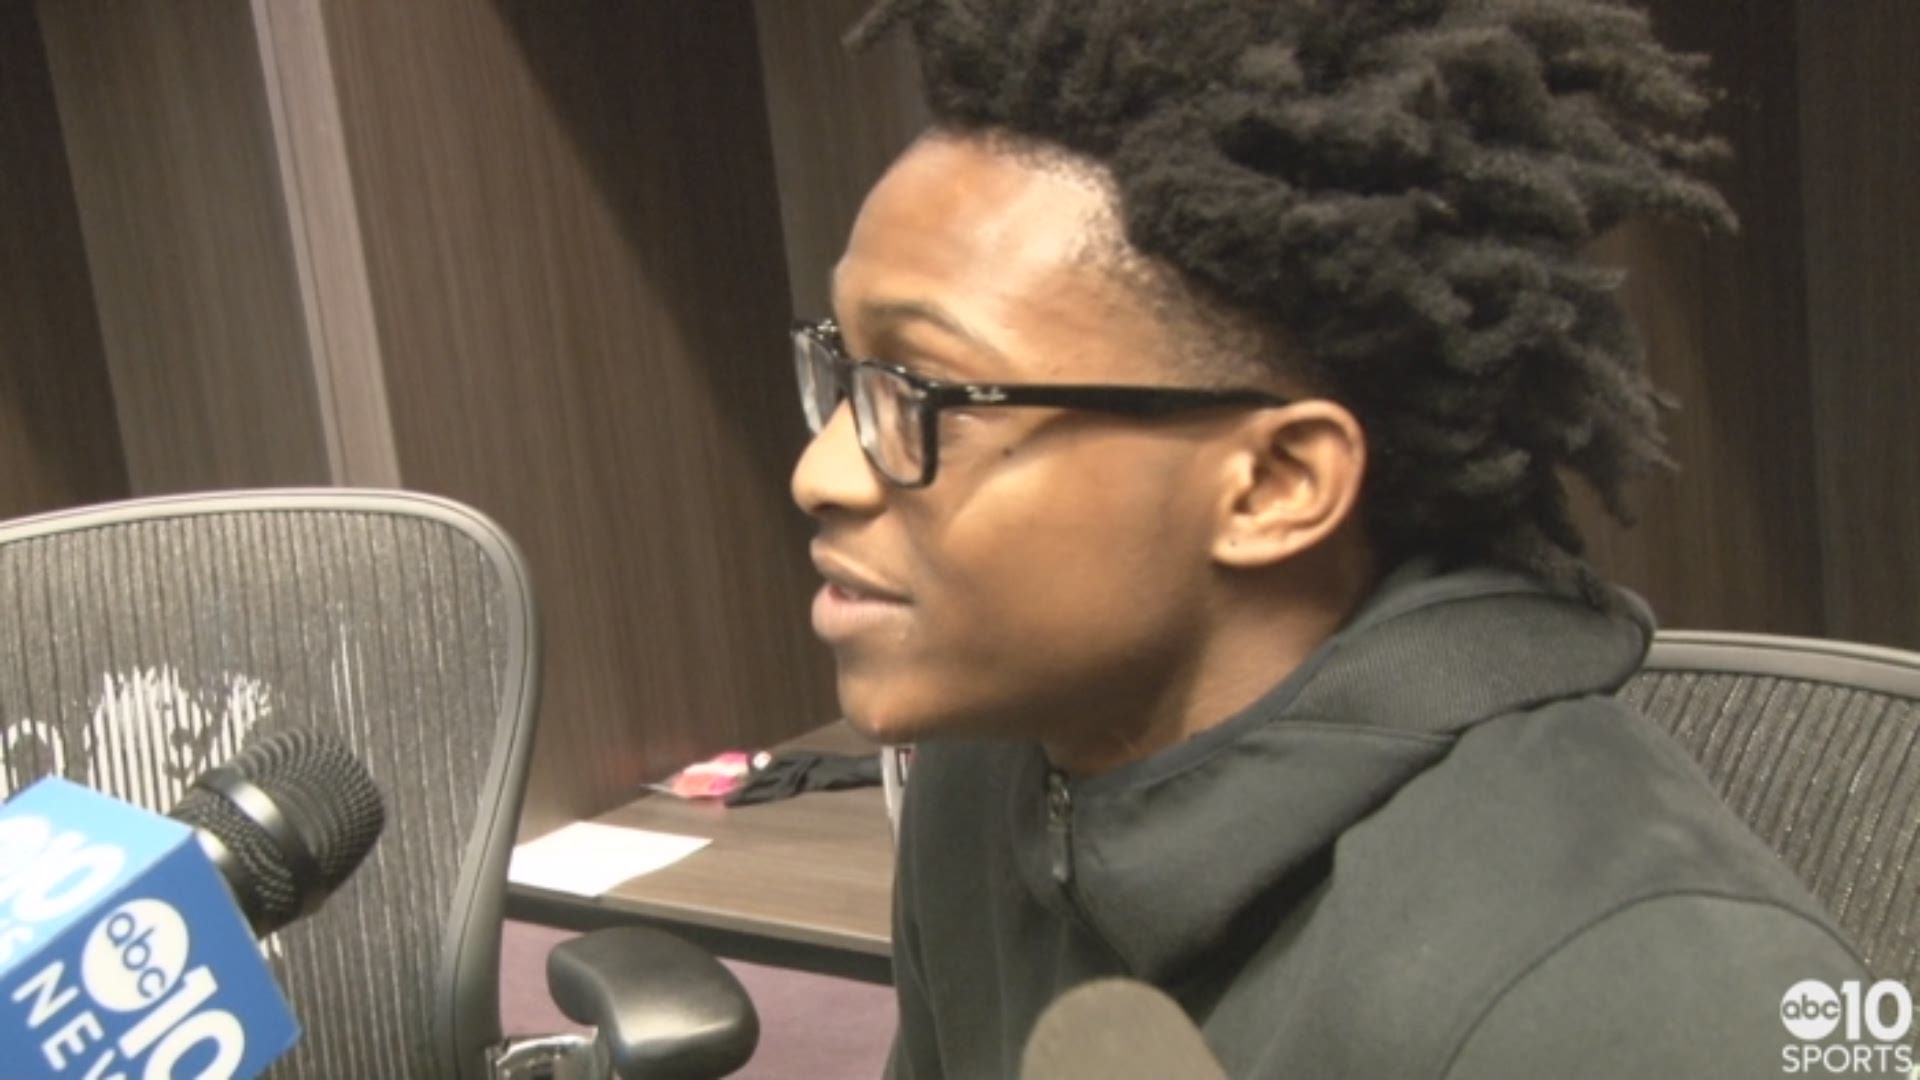 Sacramento Kings rookie guard De'Aaron Fox discusses Sunday's one-sided loss at home to the Washington Wizards, getting his first start of his NBA career and facing one of his mentors in John Wall.